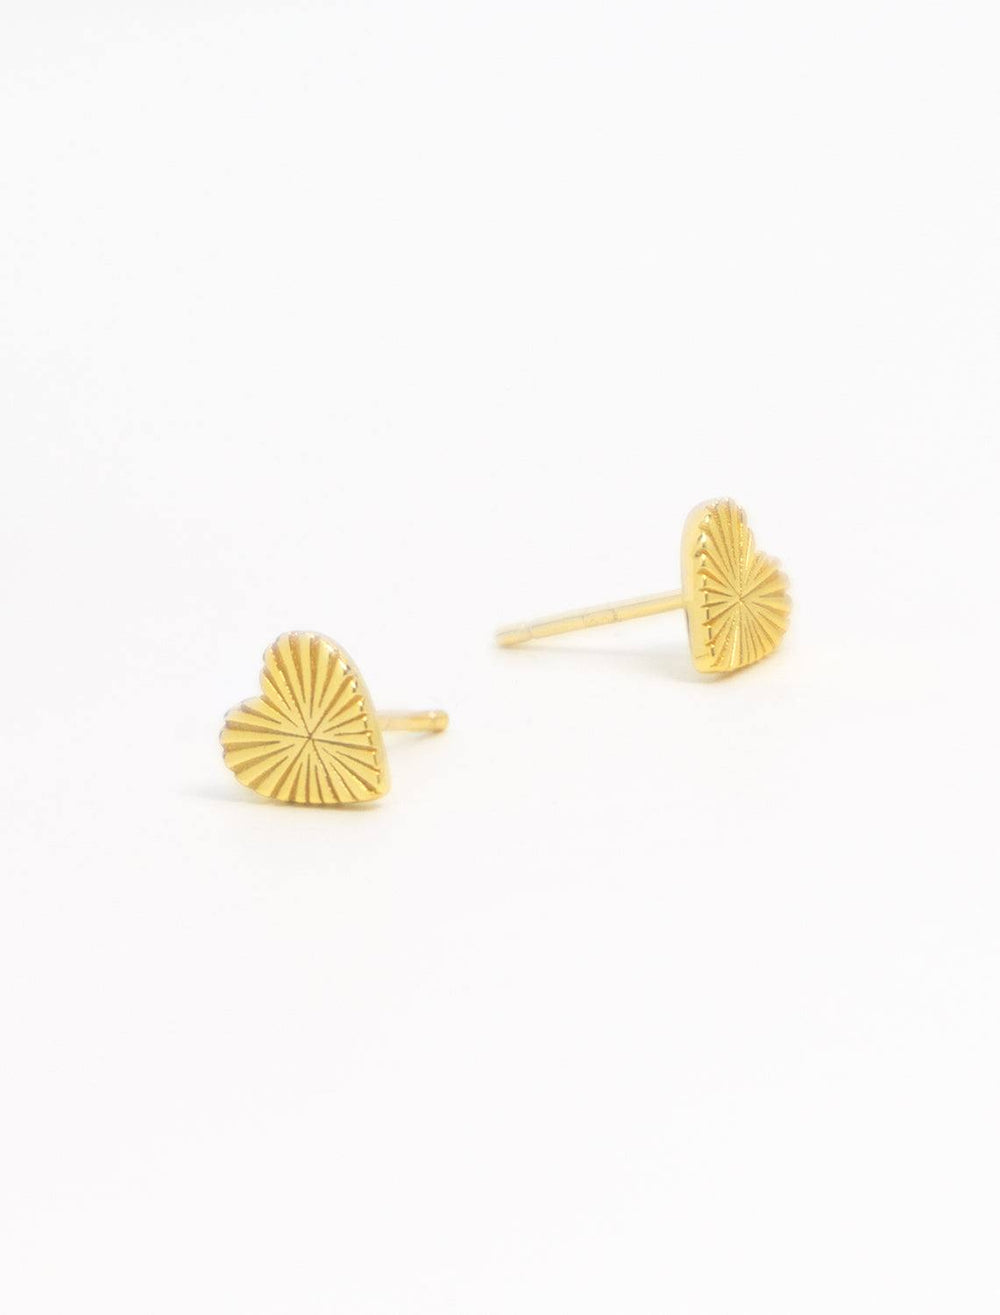 heartbeat studs in gold (2)